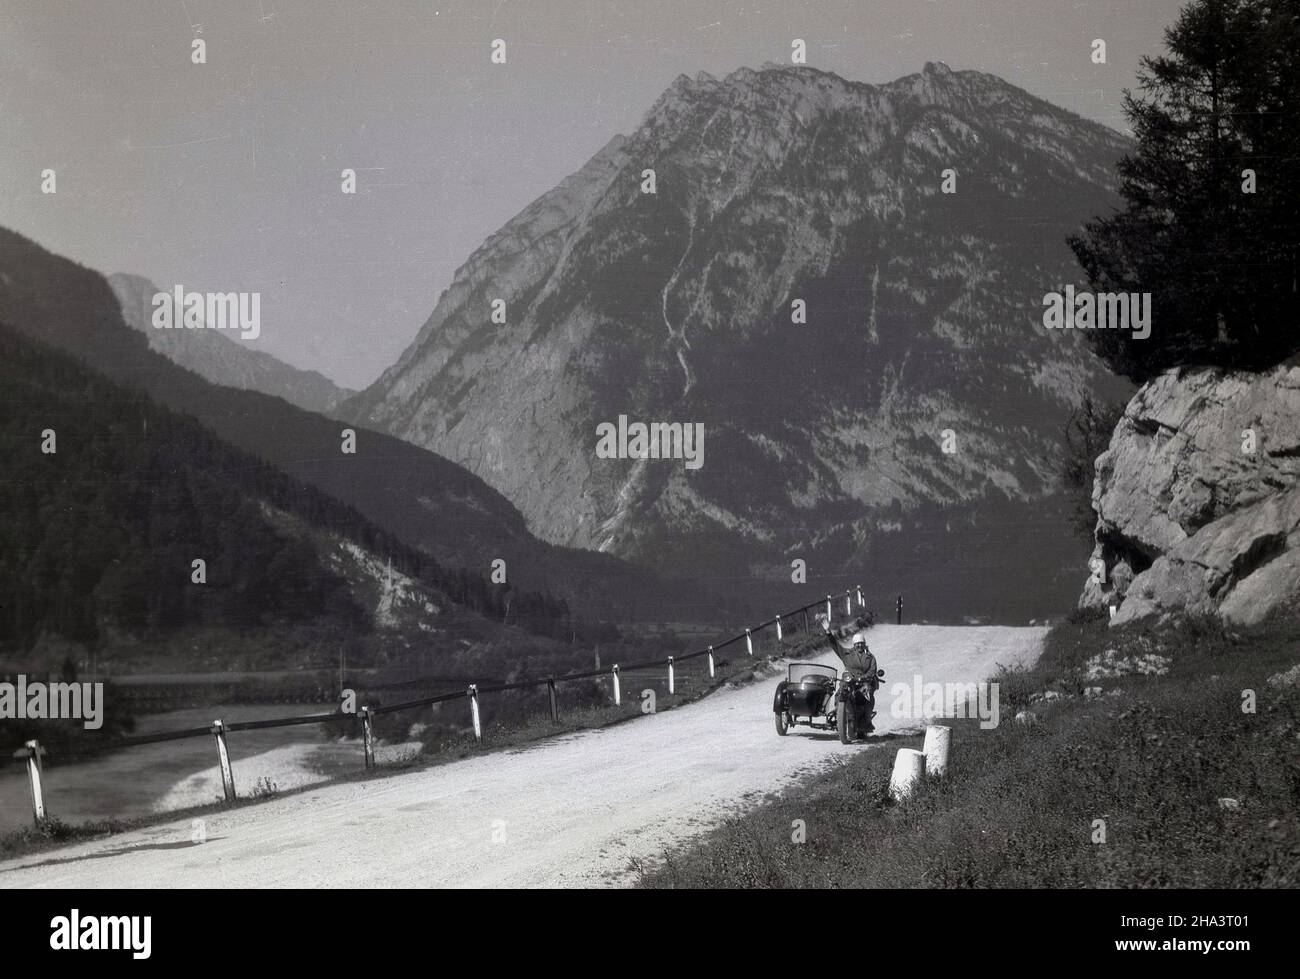 1930s, historical, on a dusty mountain road, a lady sitting on an Indian Scout motorike with sidecar, waving to the person in the distance taking her photo, Alps, France. Stock Photo